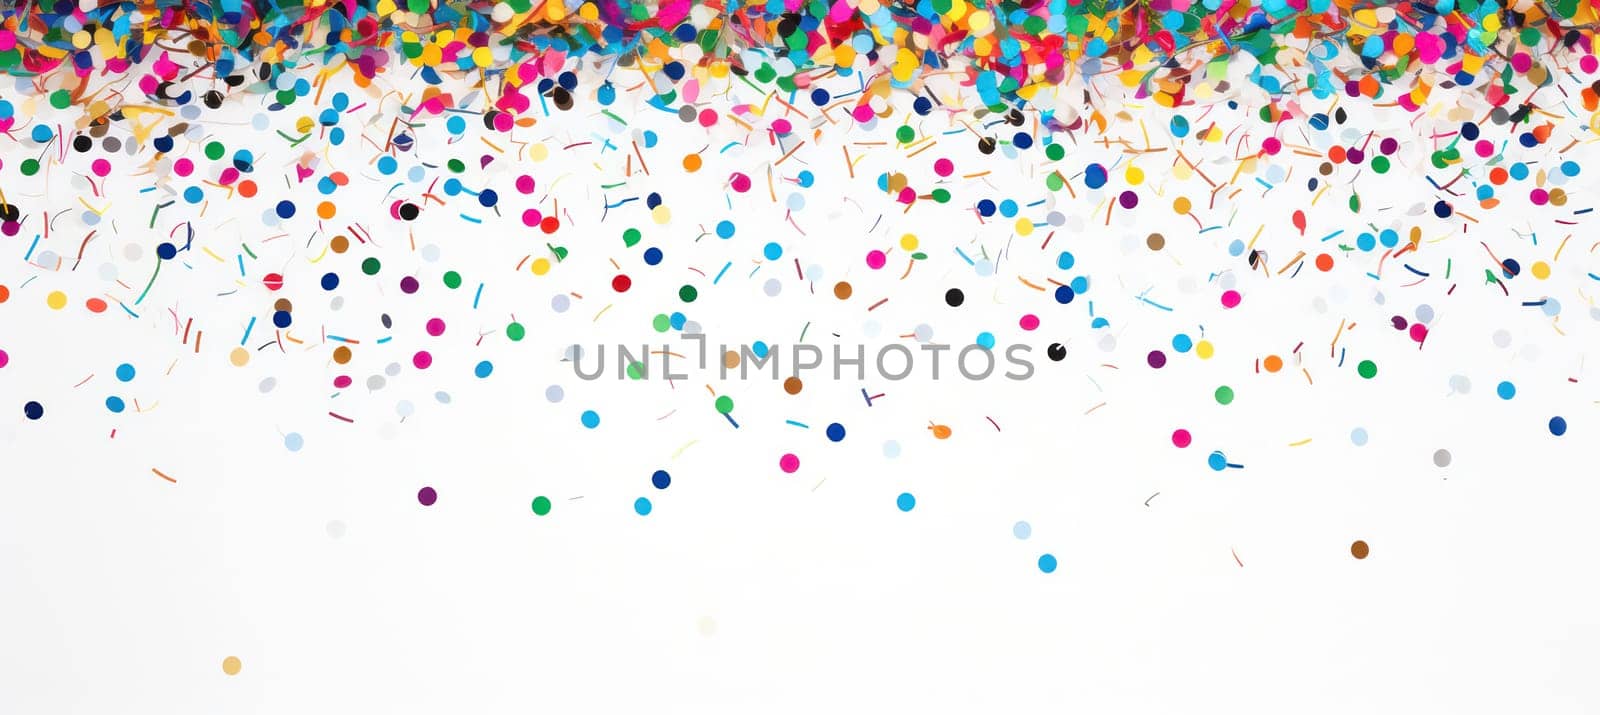 Colorful Celebrations: A Festive Confetti Extravaganza on a Bright Abstract Party Background by Vichizh